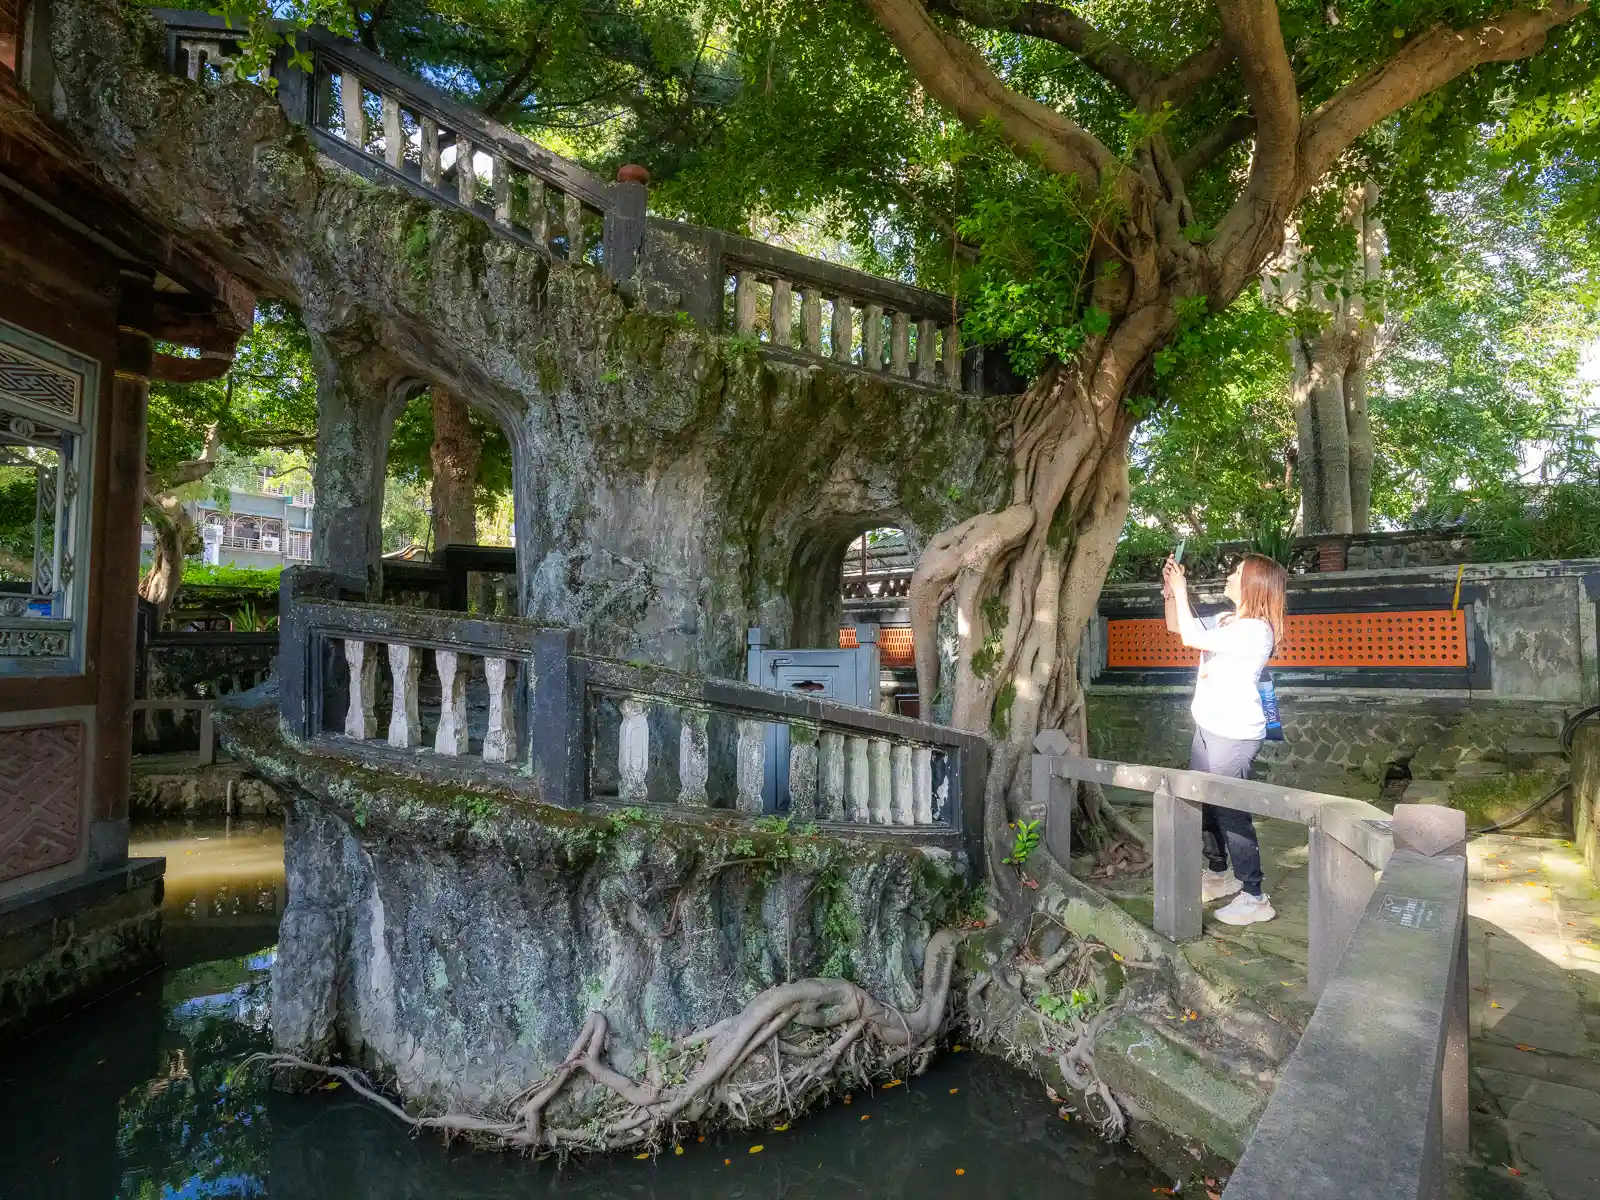 A banyan tree has grown around the stone support for a spiral staircase at Lin Family Mansion and Garden.